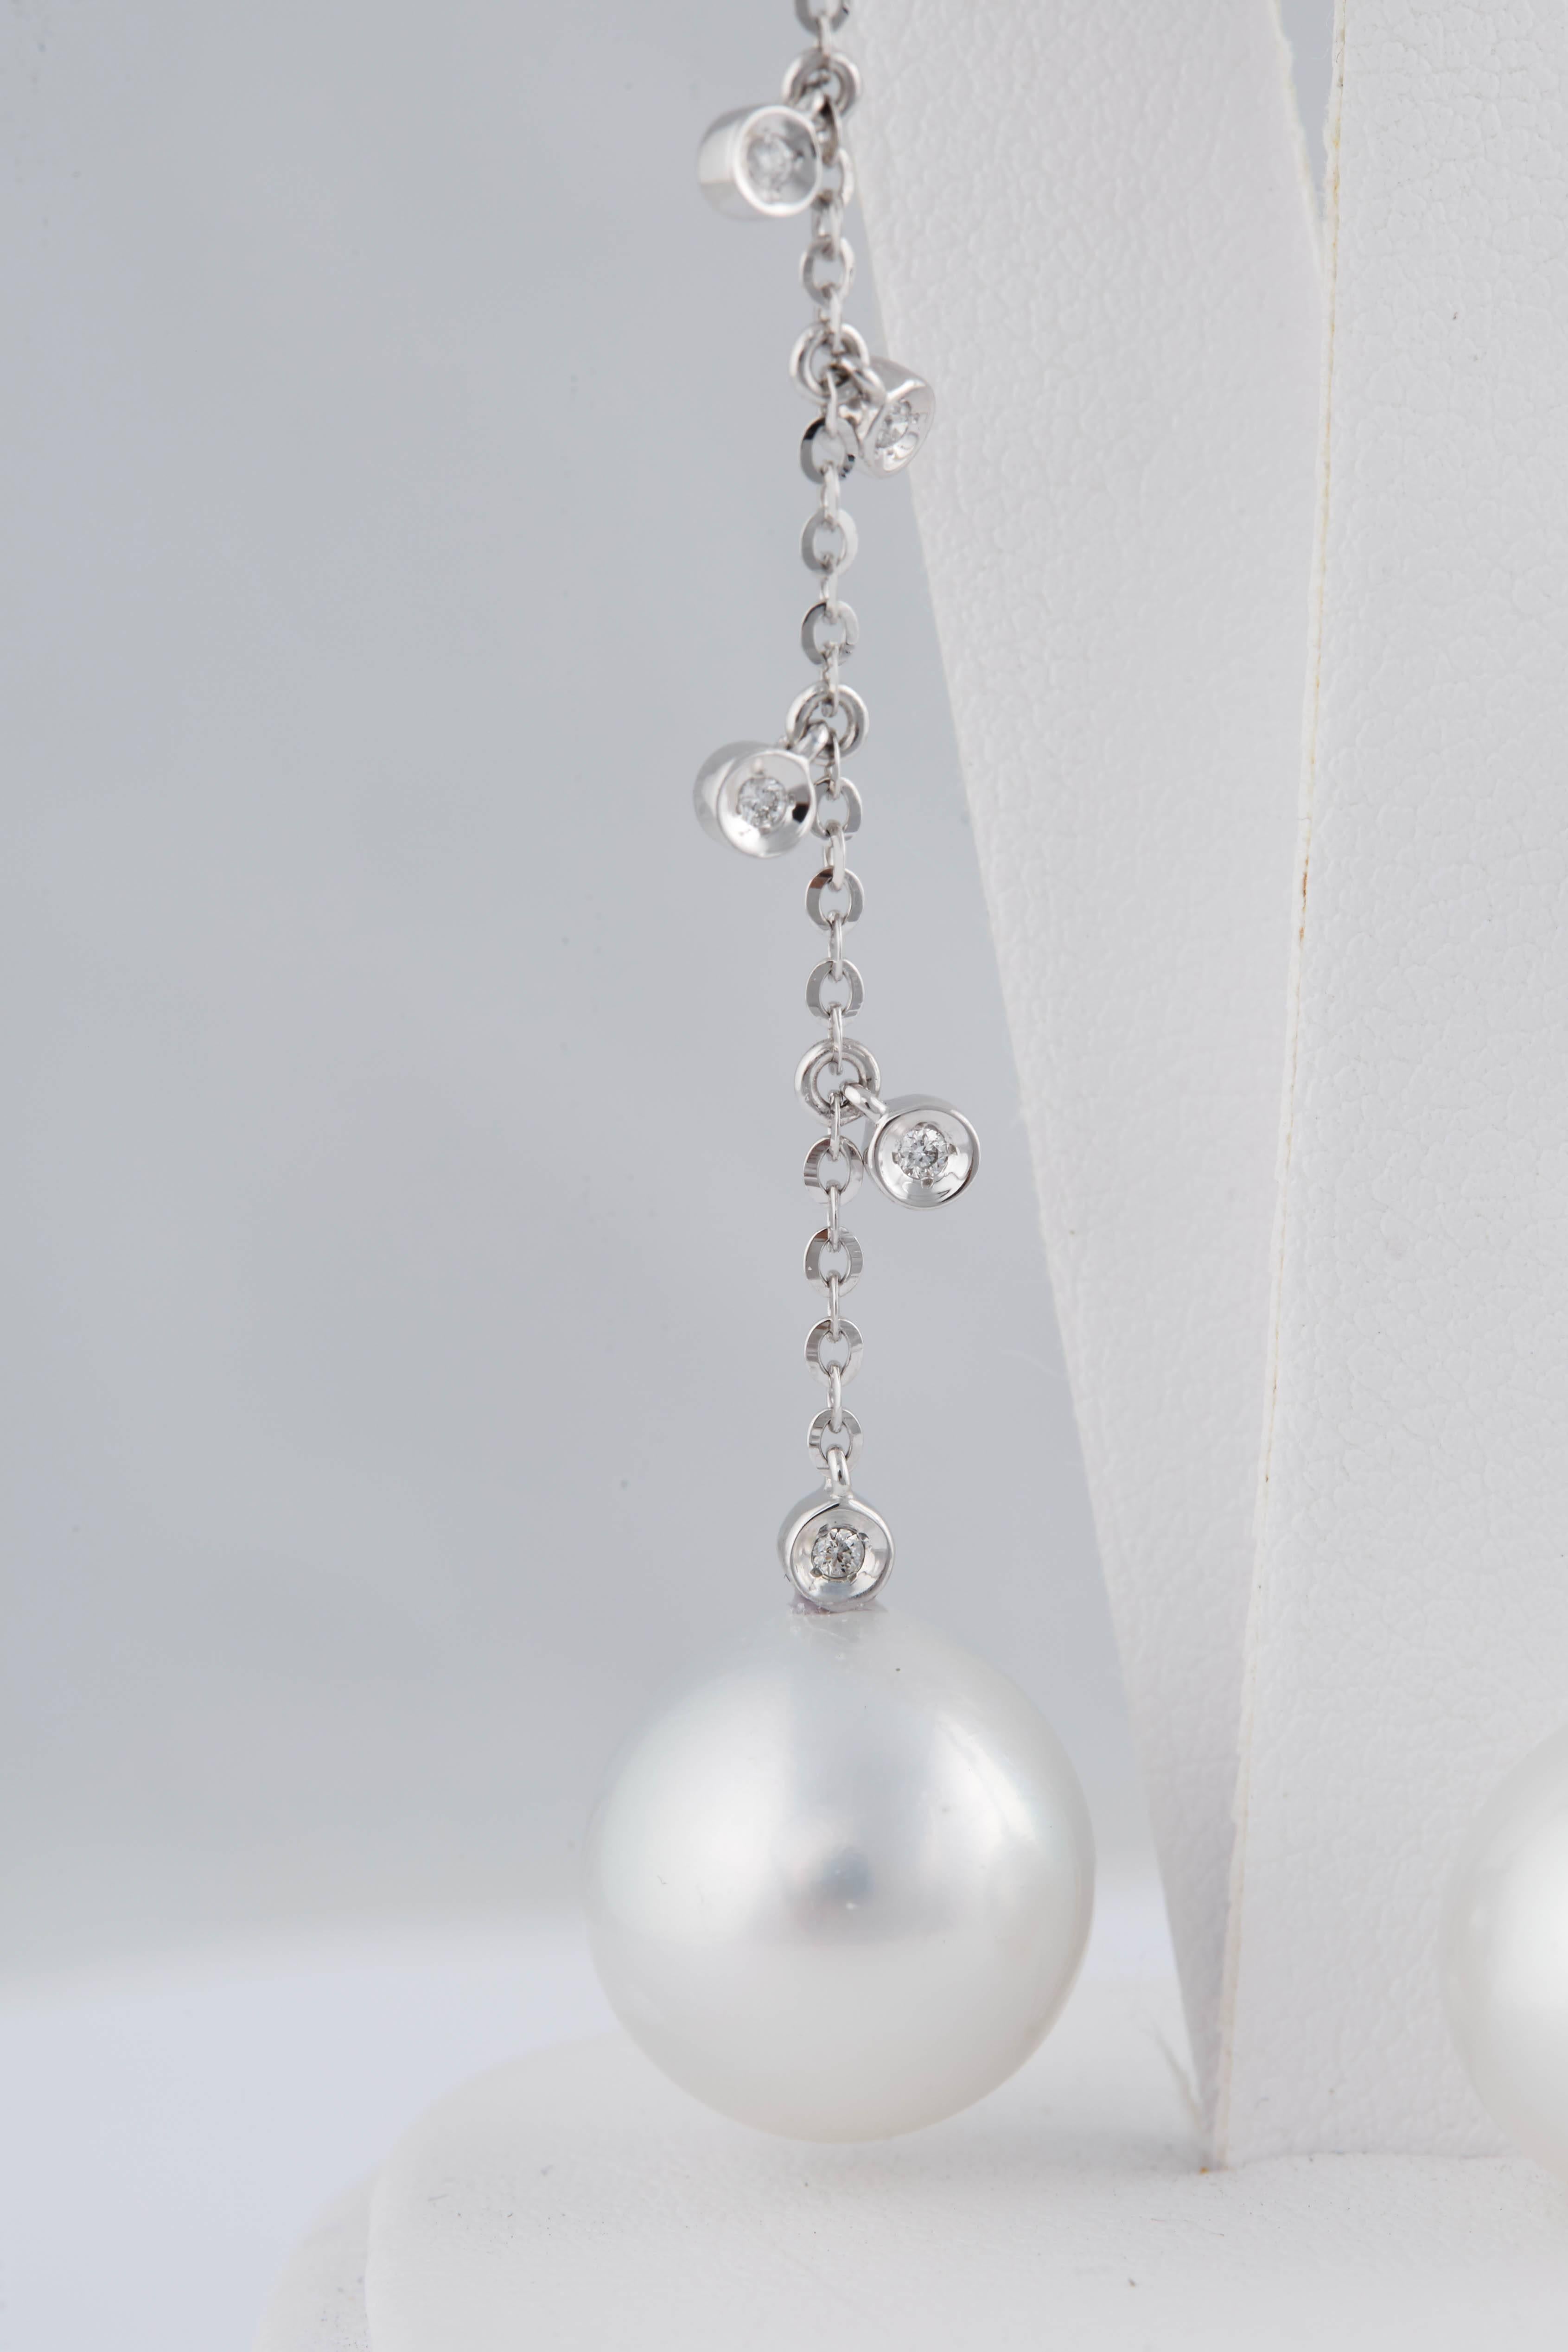 Round Cut Dangling South Sea Pearl with Diamond Accent Earrings